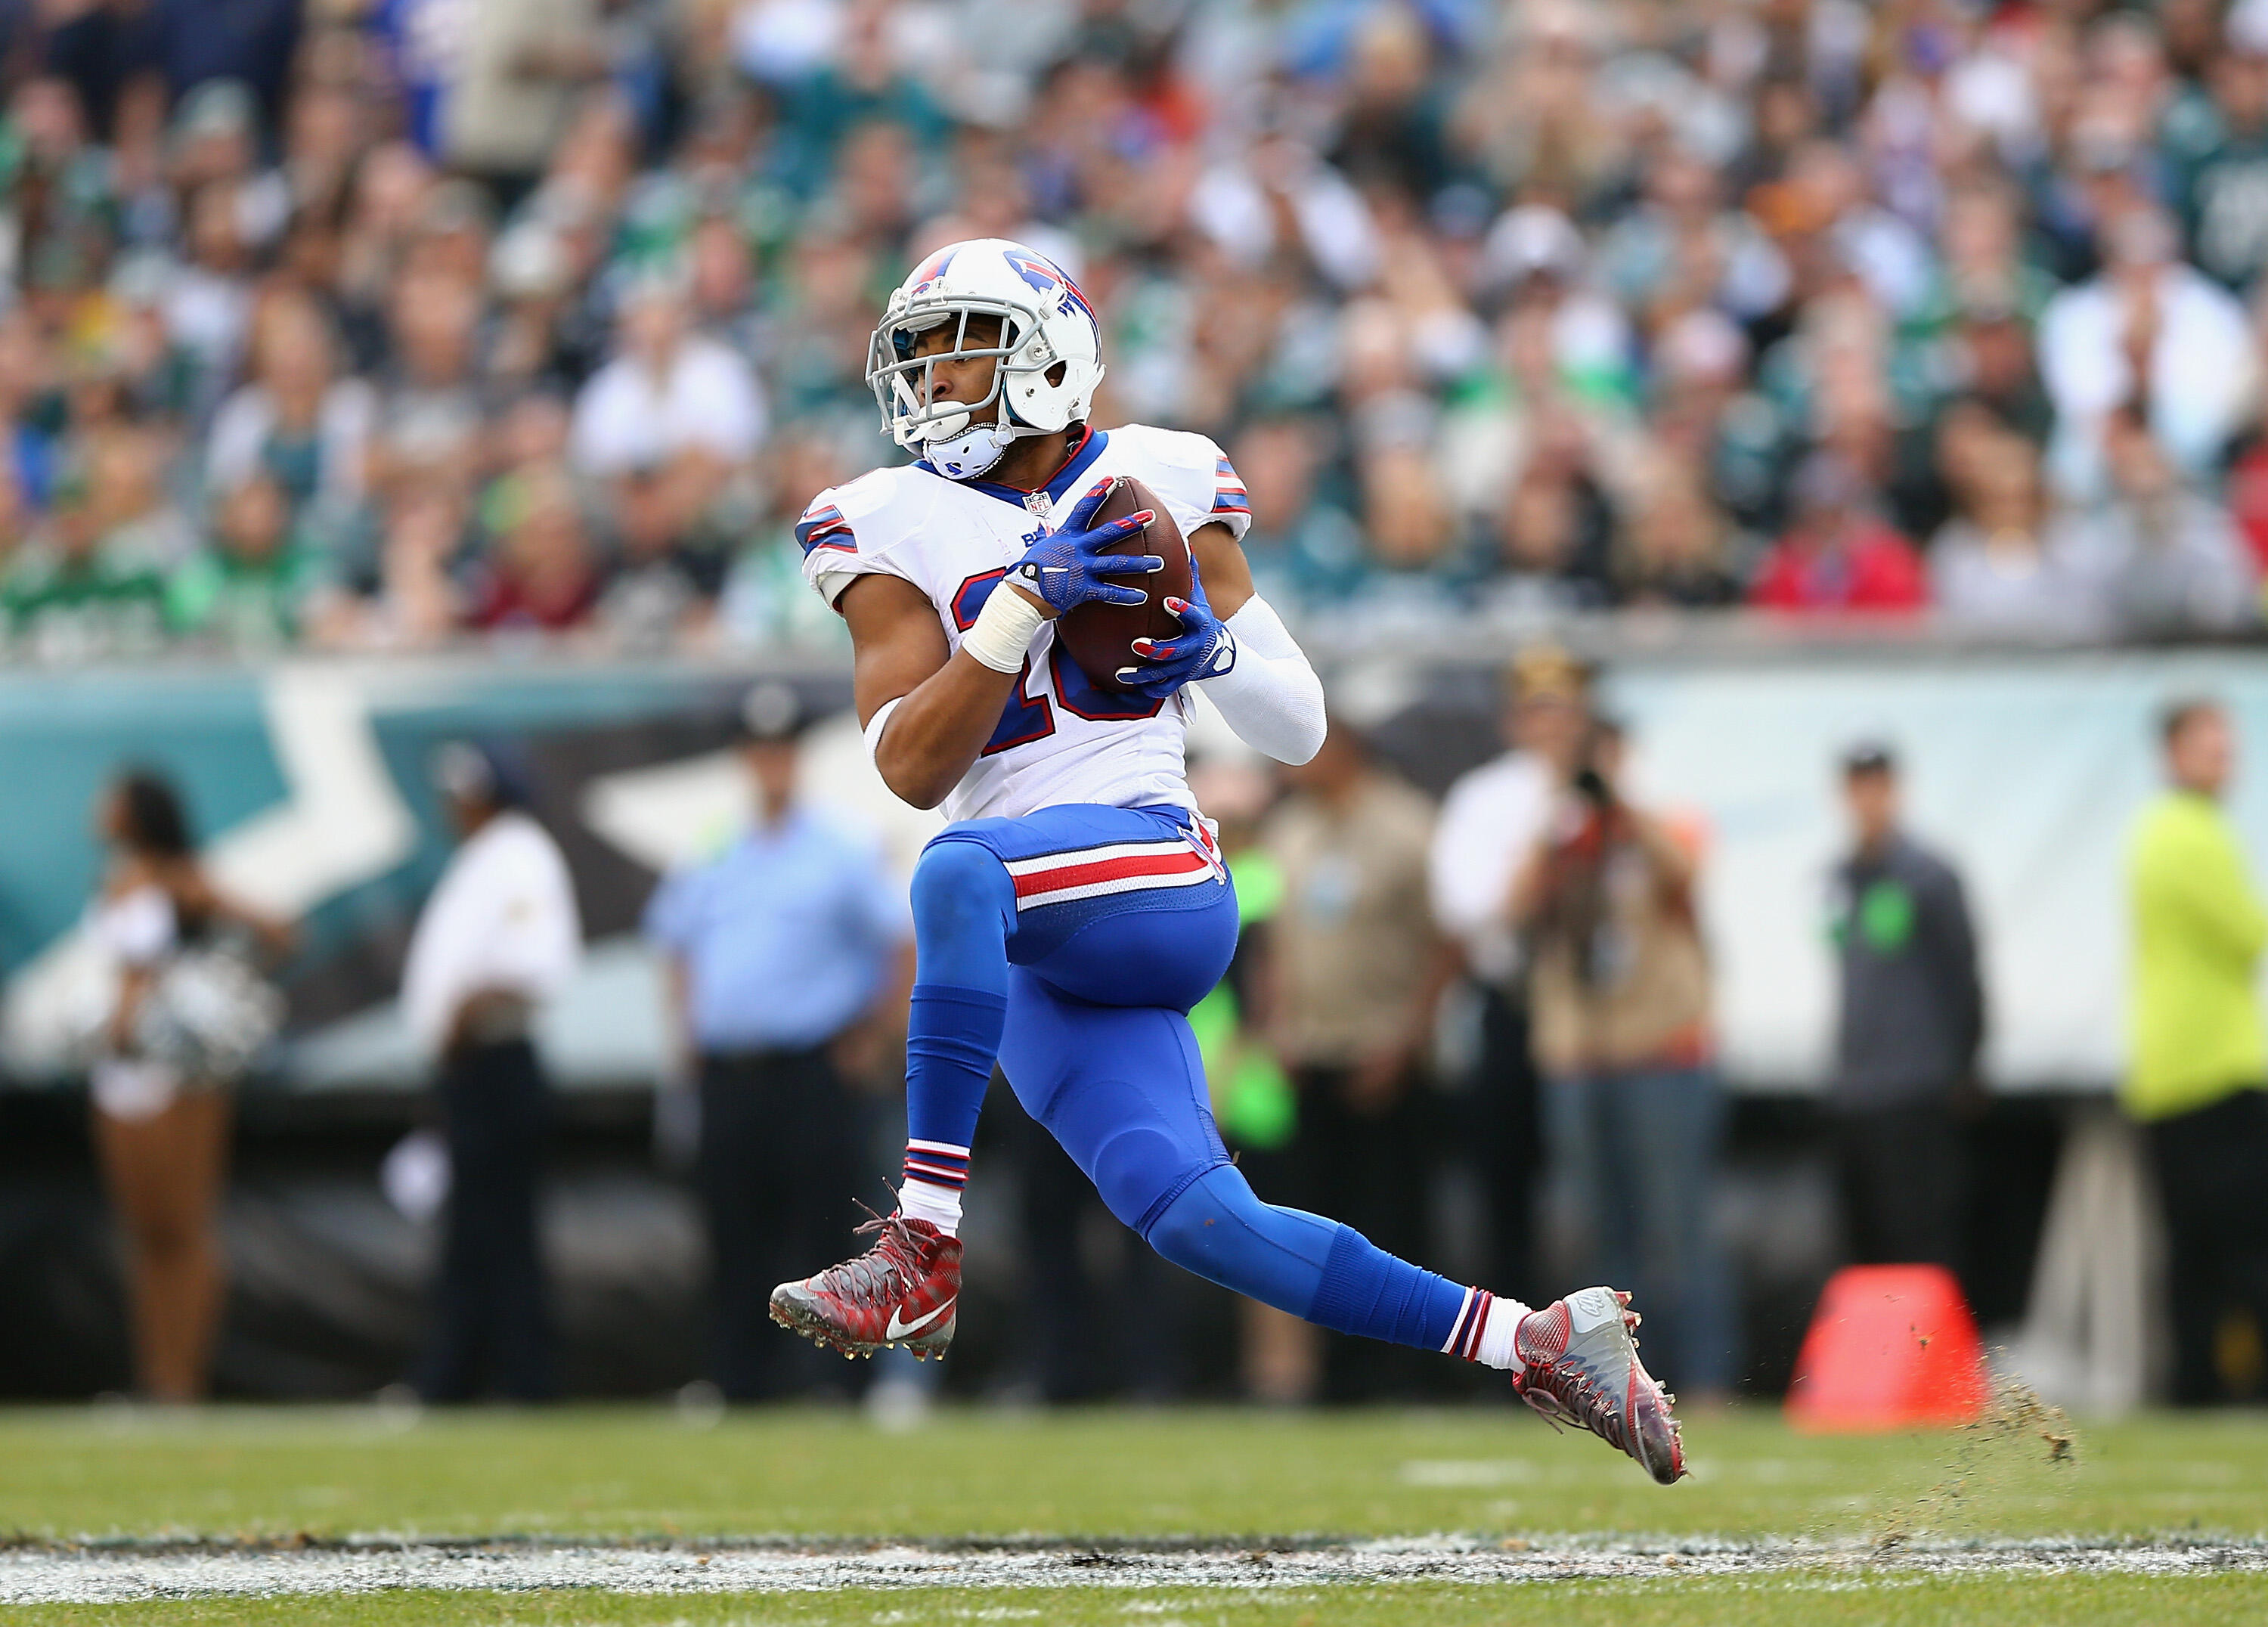 PHILADELPHIA, PA - DECEMBER 13:  Robert Woods #10 of the Buffalo Bills catches the ball against the Philadelphia Eagles during the first quarter at Lincoln Financial Field on December 13, 2015 in Philadelphia, Pennsylvania.  (Photo by Elsa/Getty Images)